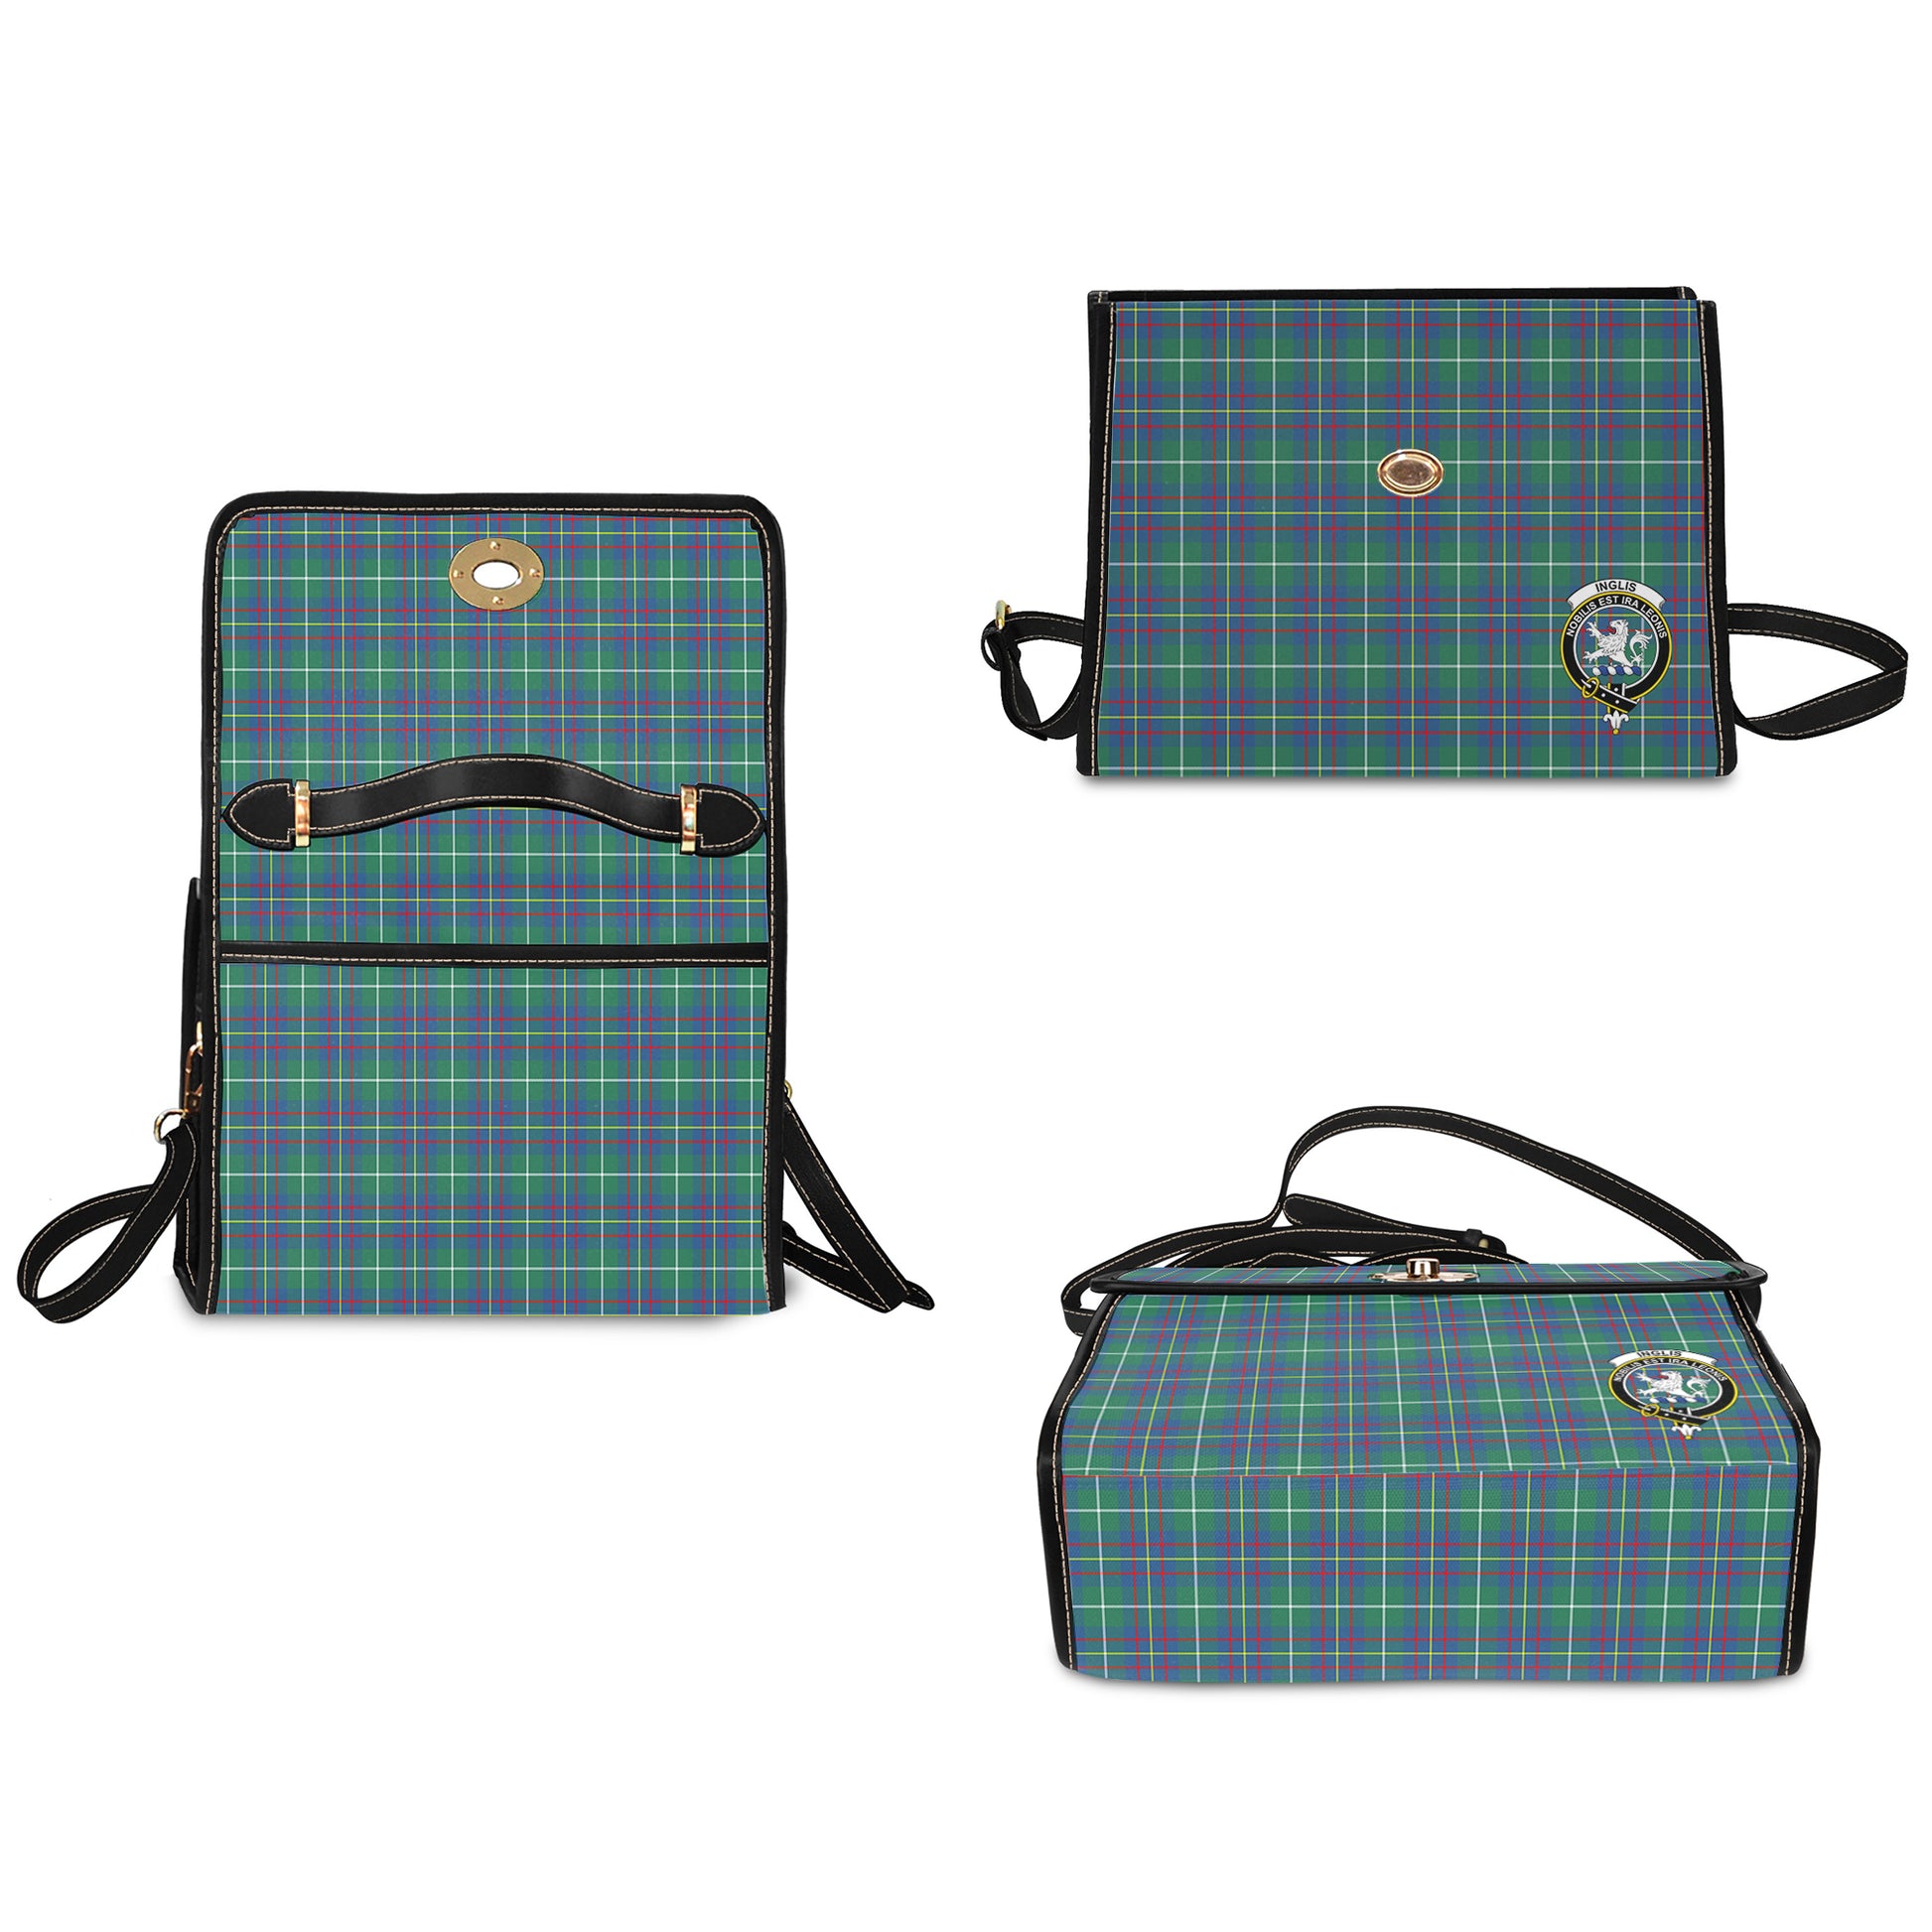 inglis-ancient-tartan-leather-strap-waterproof-canvas-bag-with-family-crest